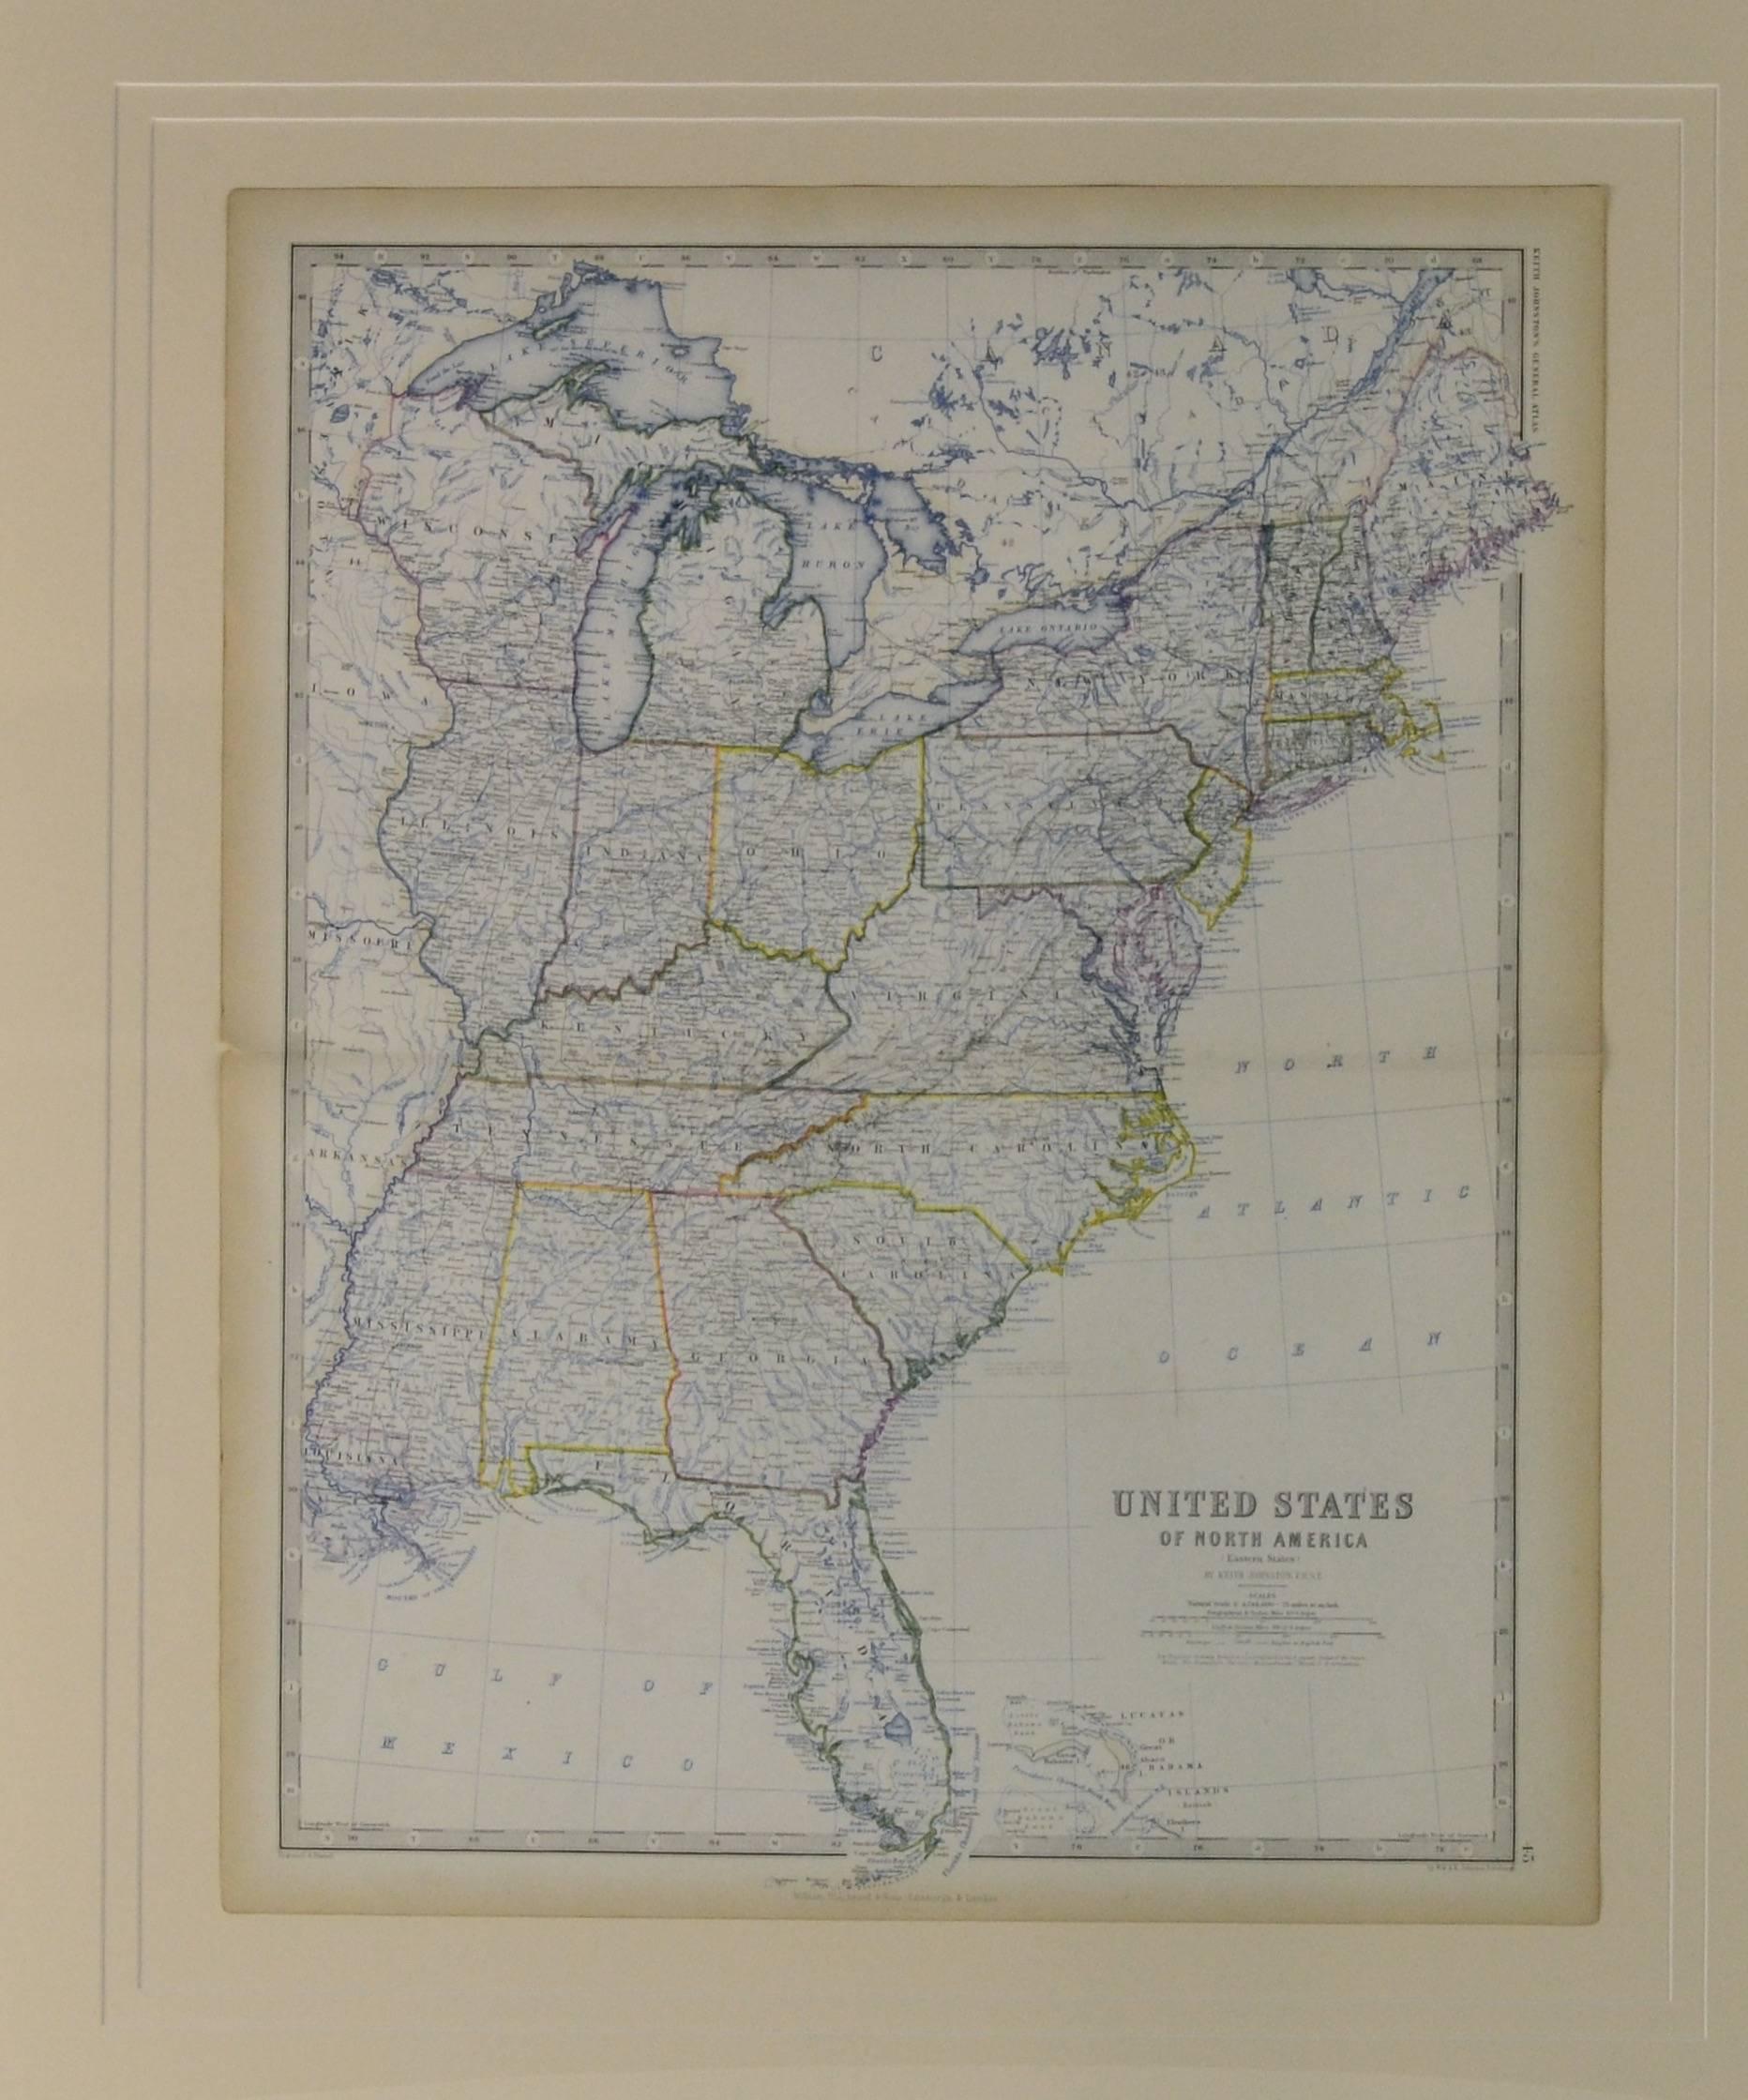 Antique map showing the early formation of the new United States.
Conservation framing with UV acrylic.
                        